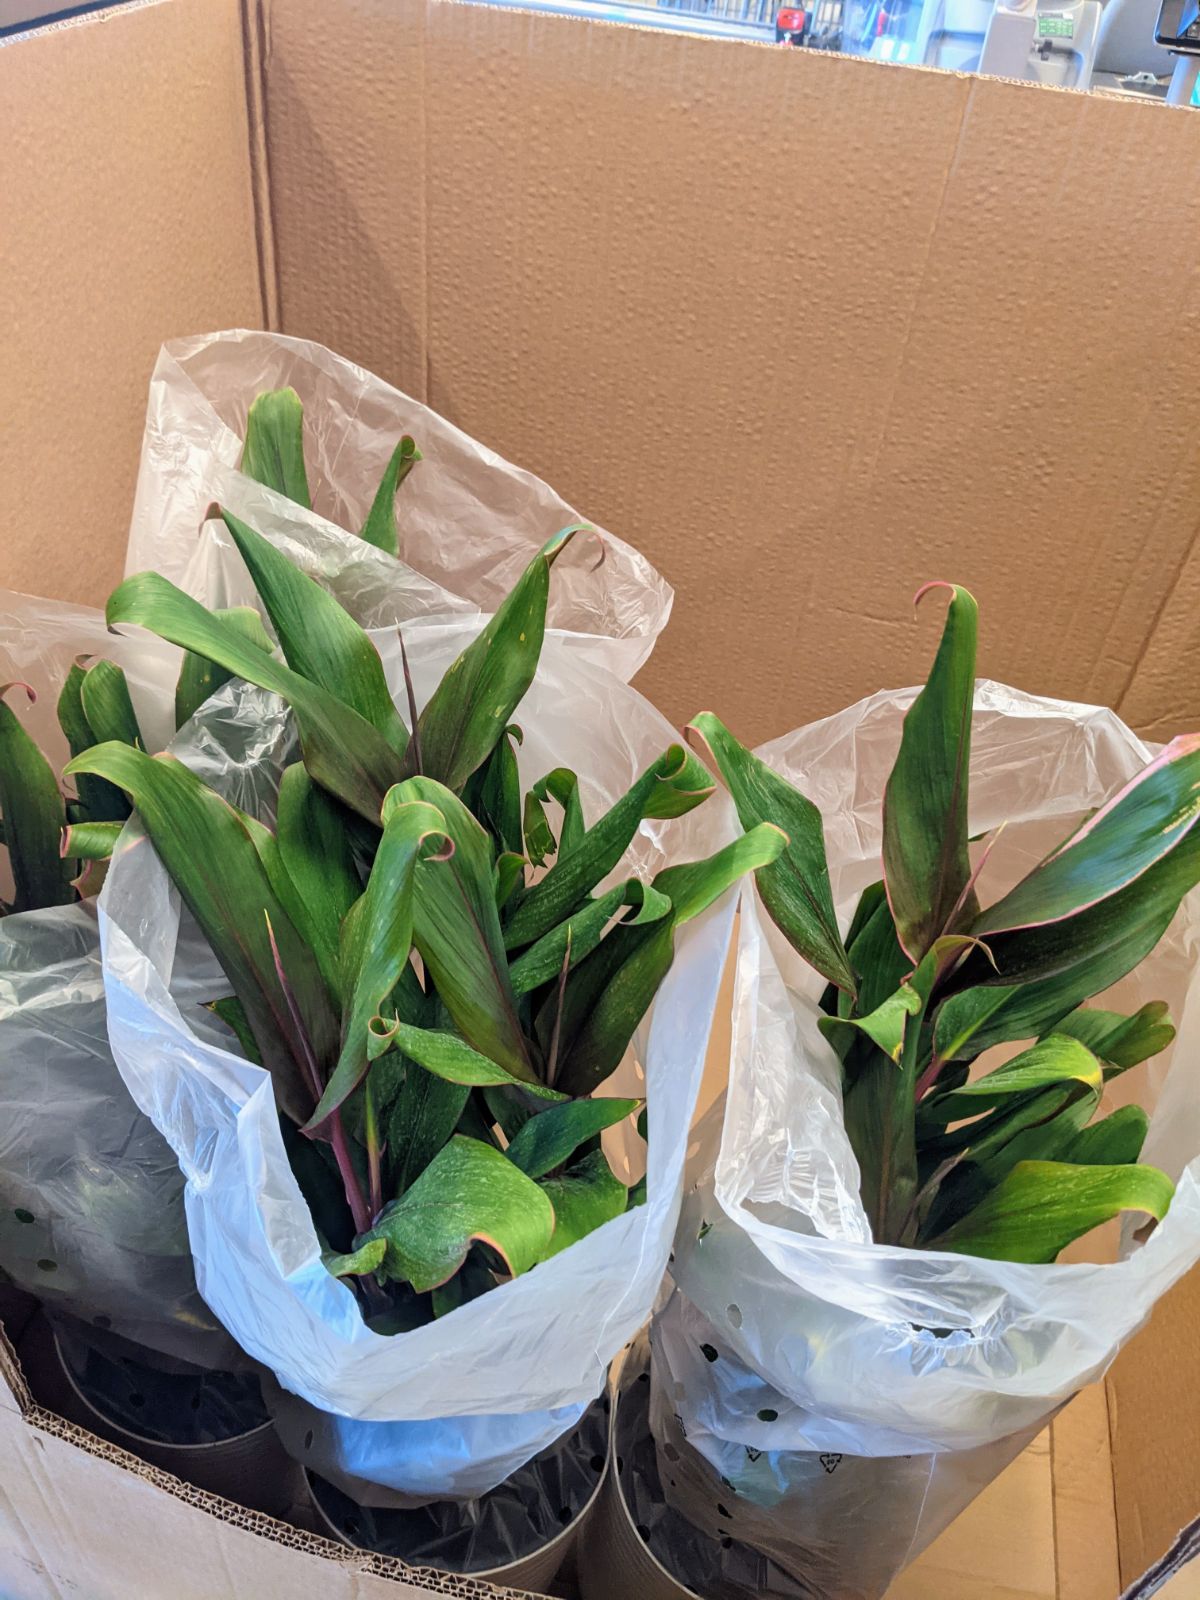 Leafy potted plants at Aldi in February 2023